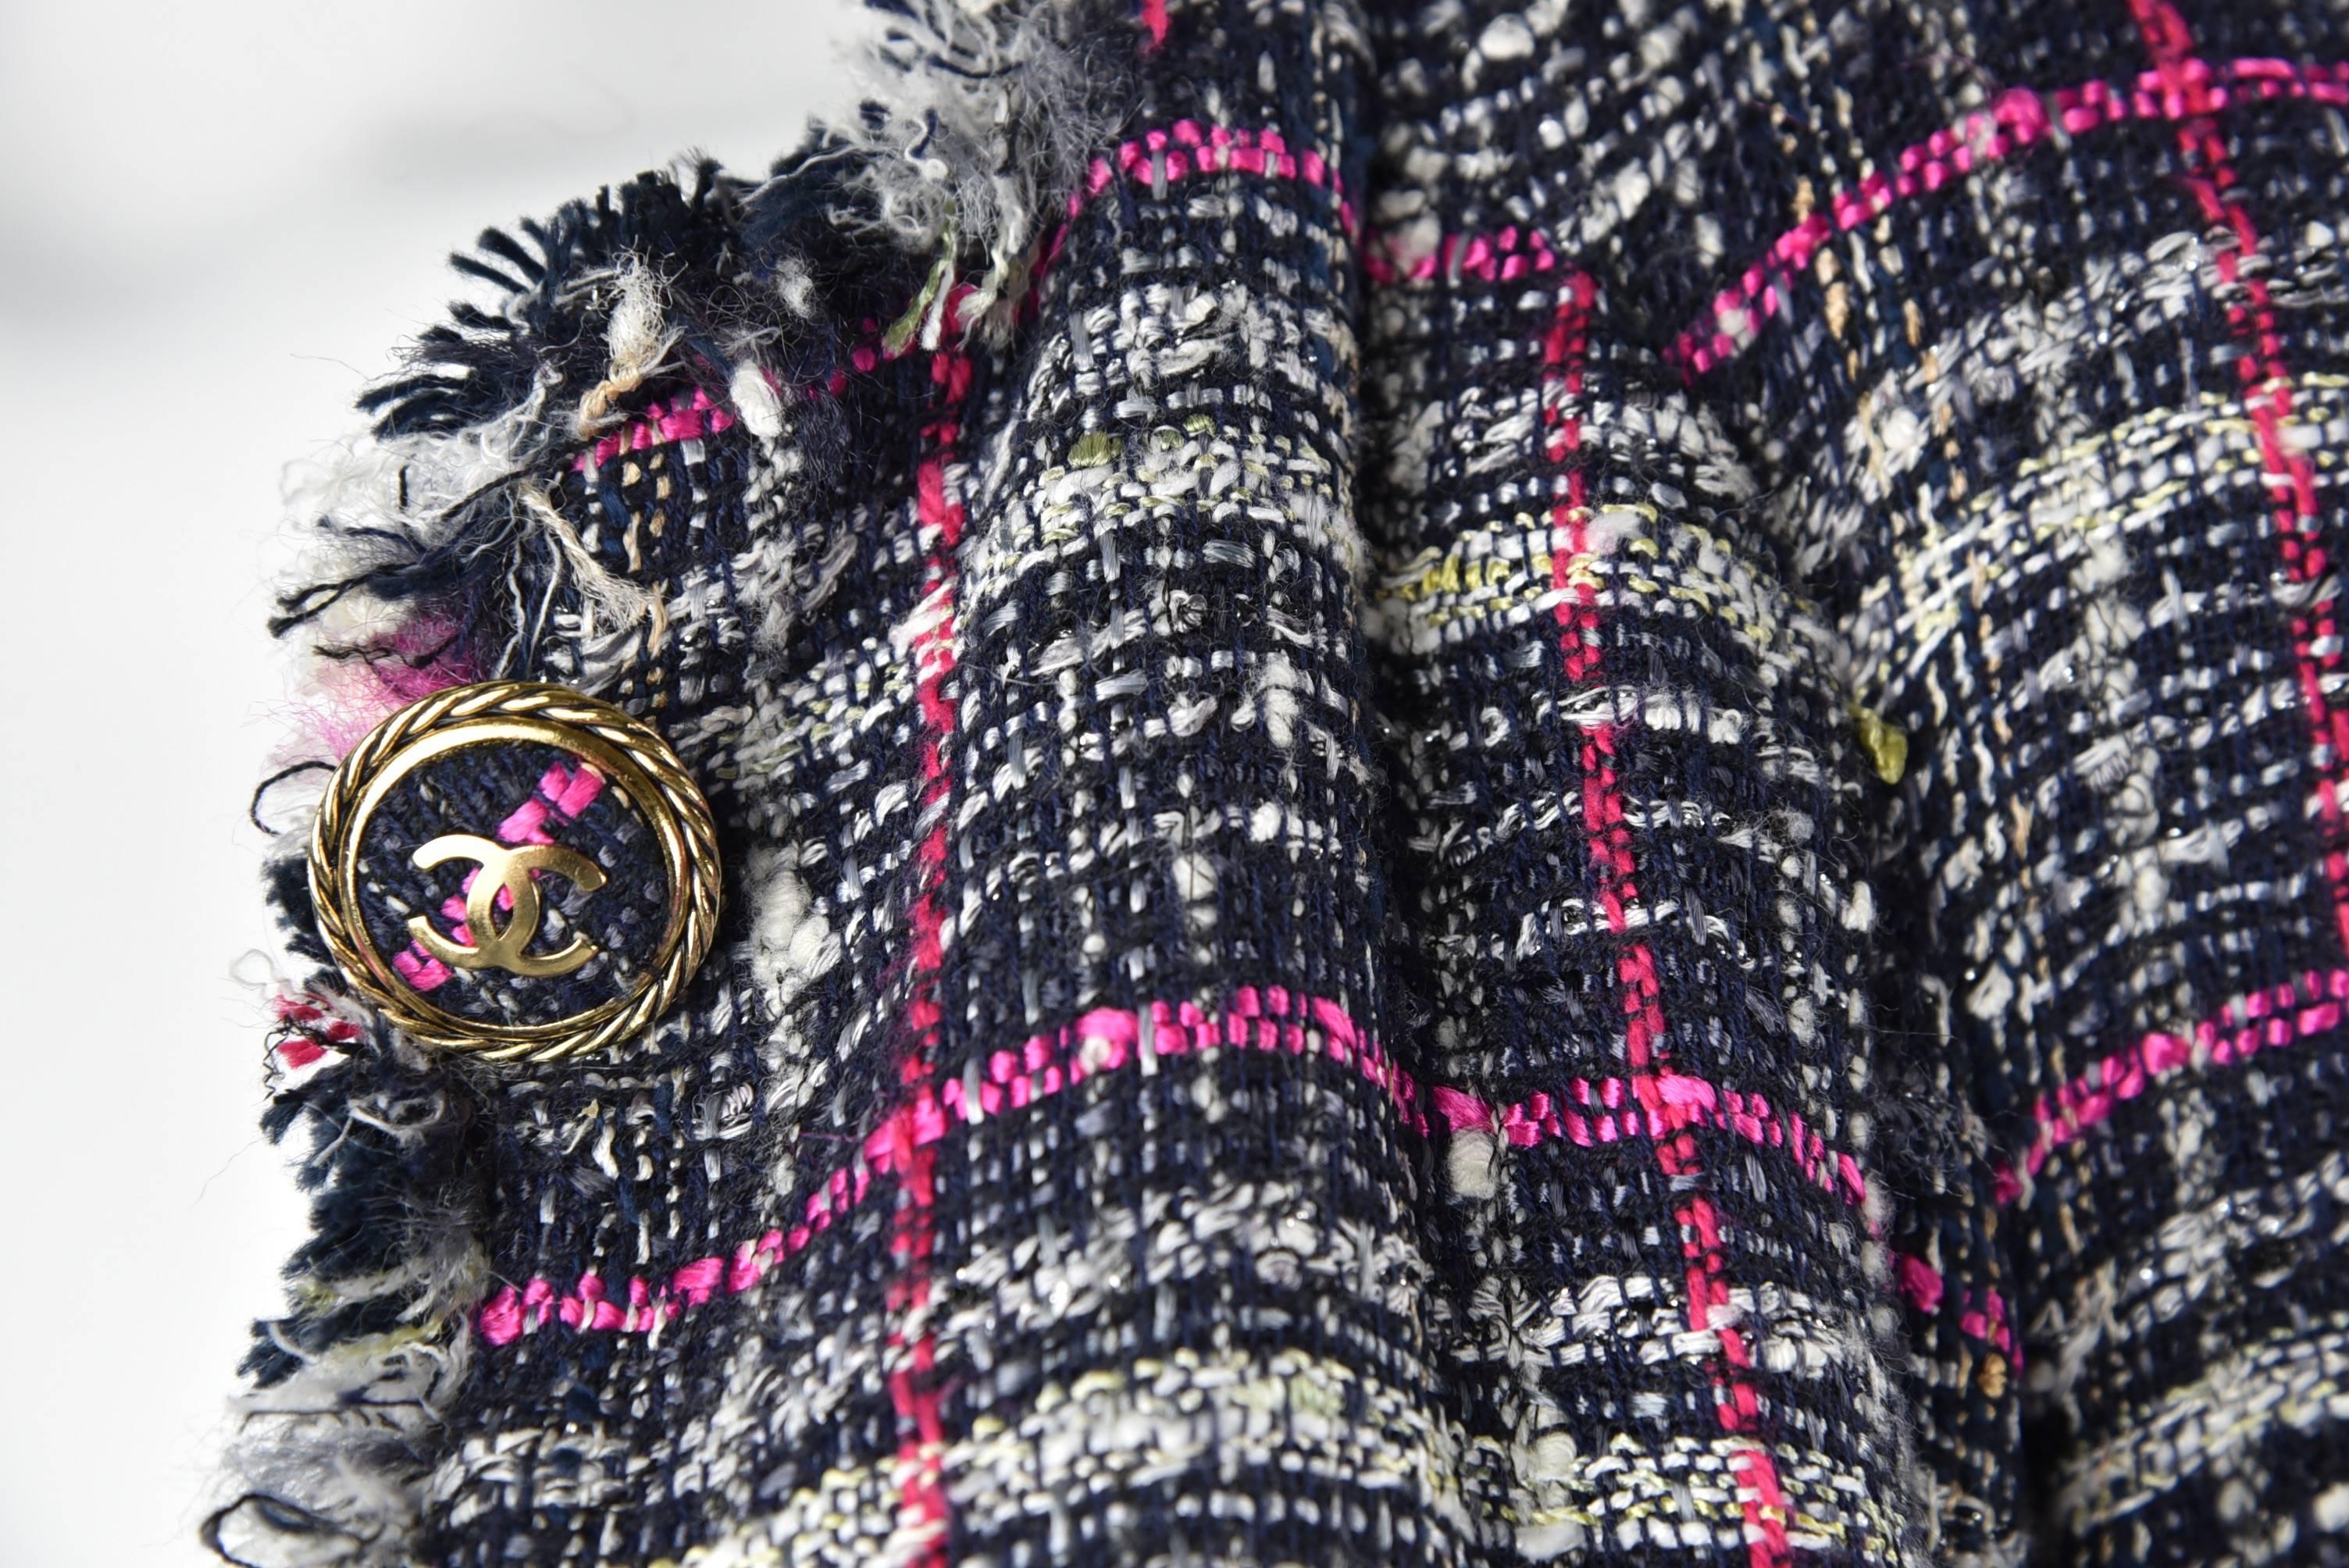 This 3/4 Coat is a wonderfully useful plaid Summer coat over skirts, dresses, pants or jeans.  The gorgeous fabric is woven of cotton, rayon, nylon, wool, linen and acrylic with silver metallic threads in the usual style of Chanel lush fabric